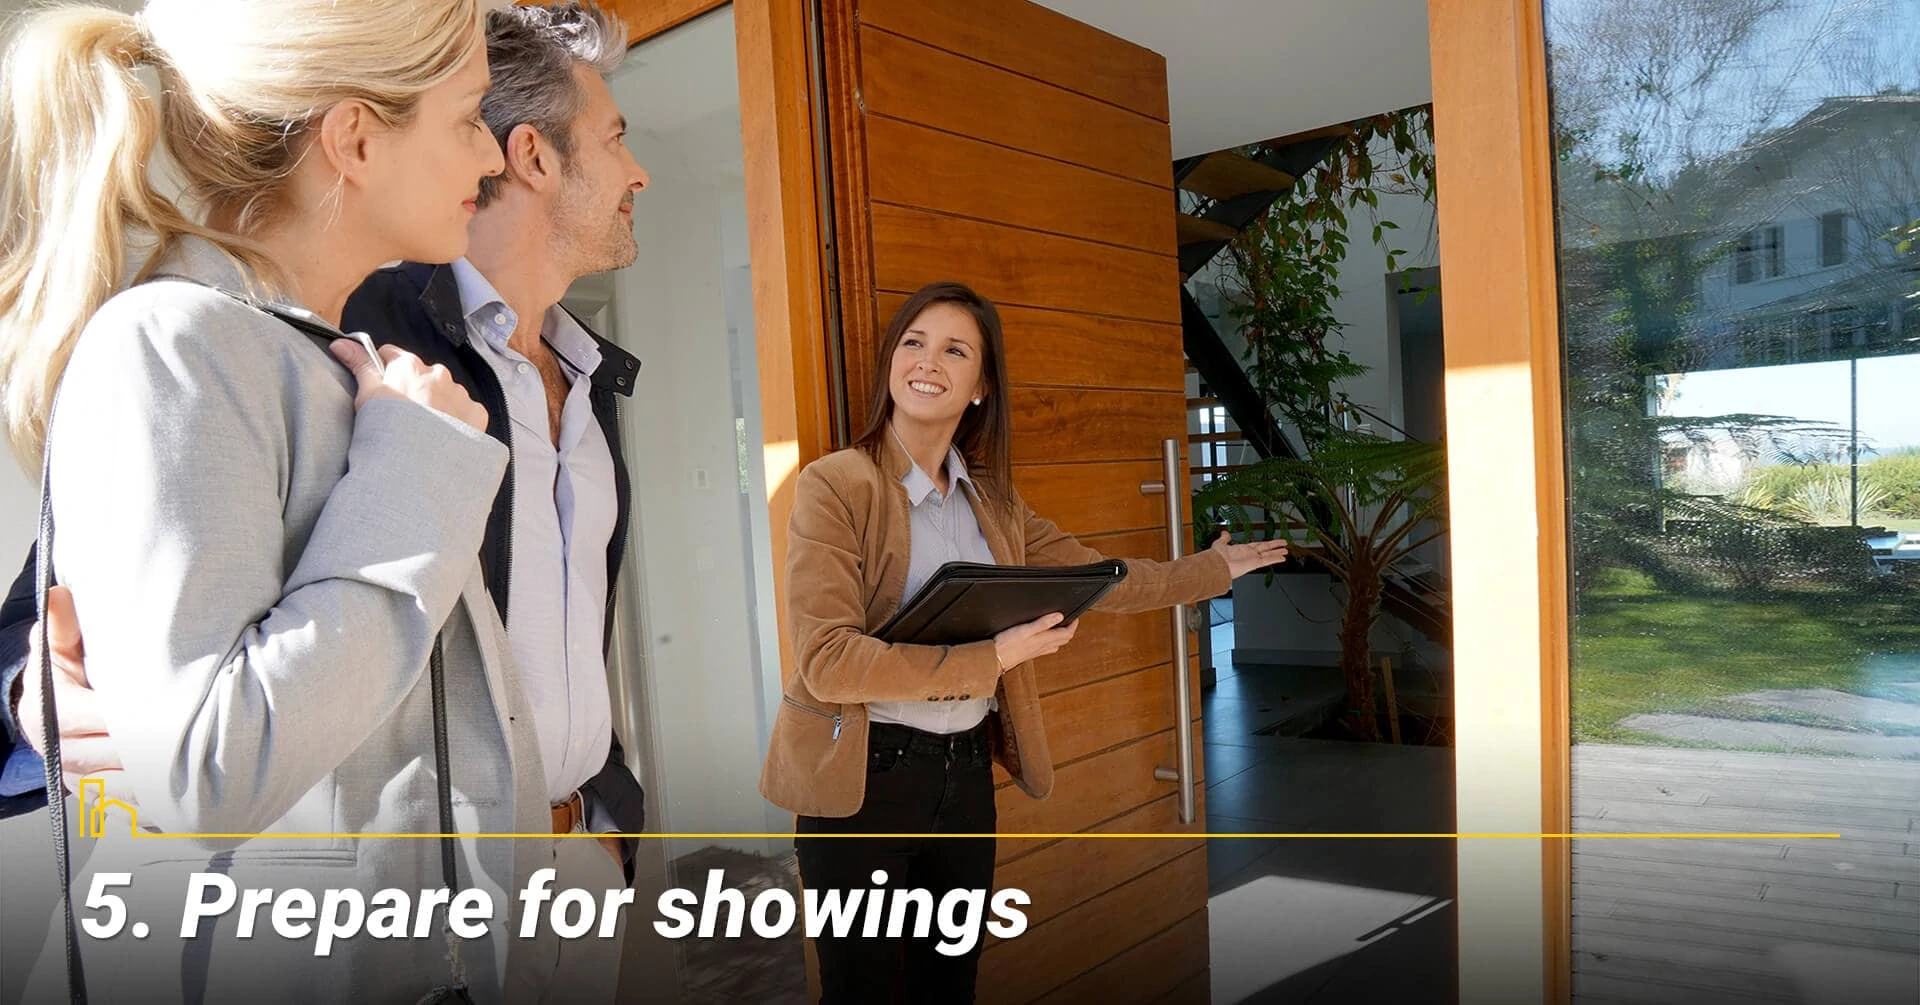 Prepare for showings, get your home ready for showings